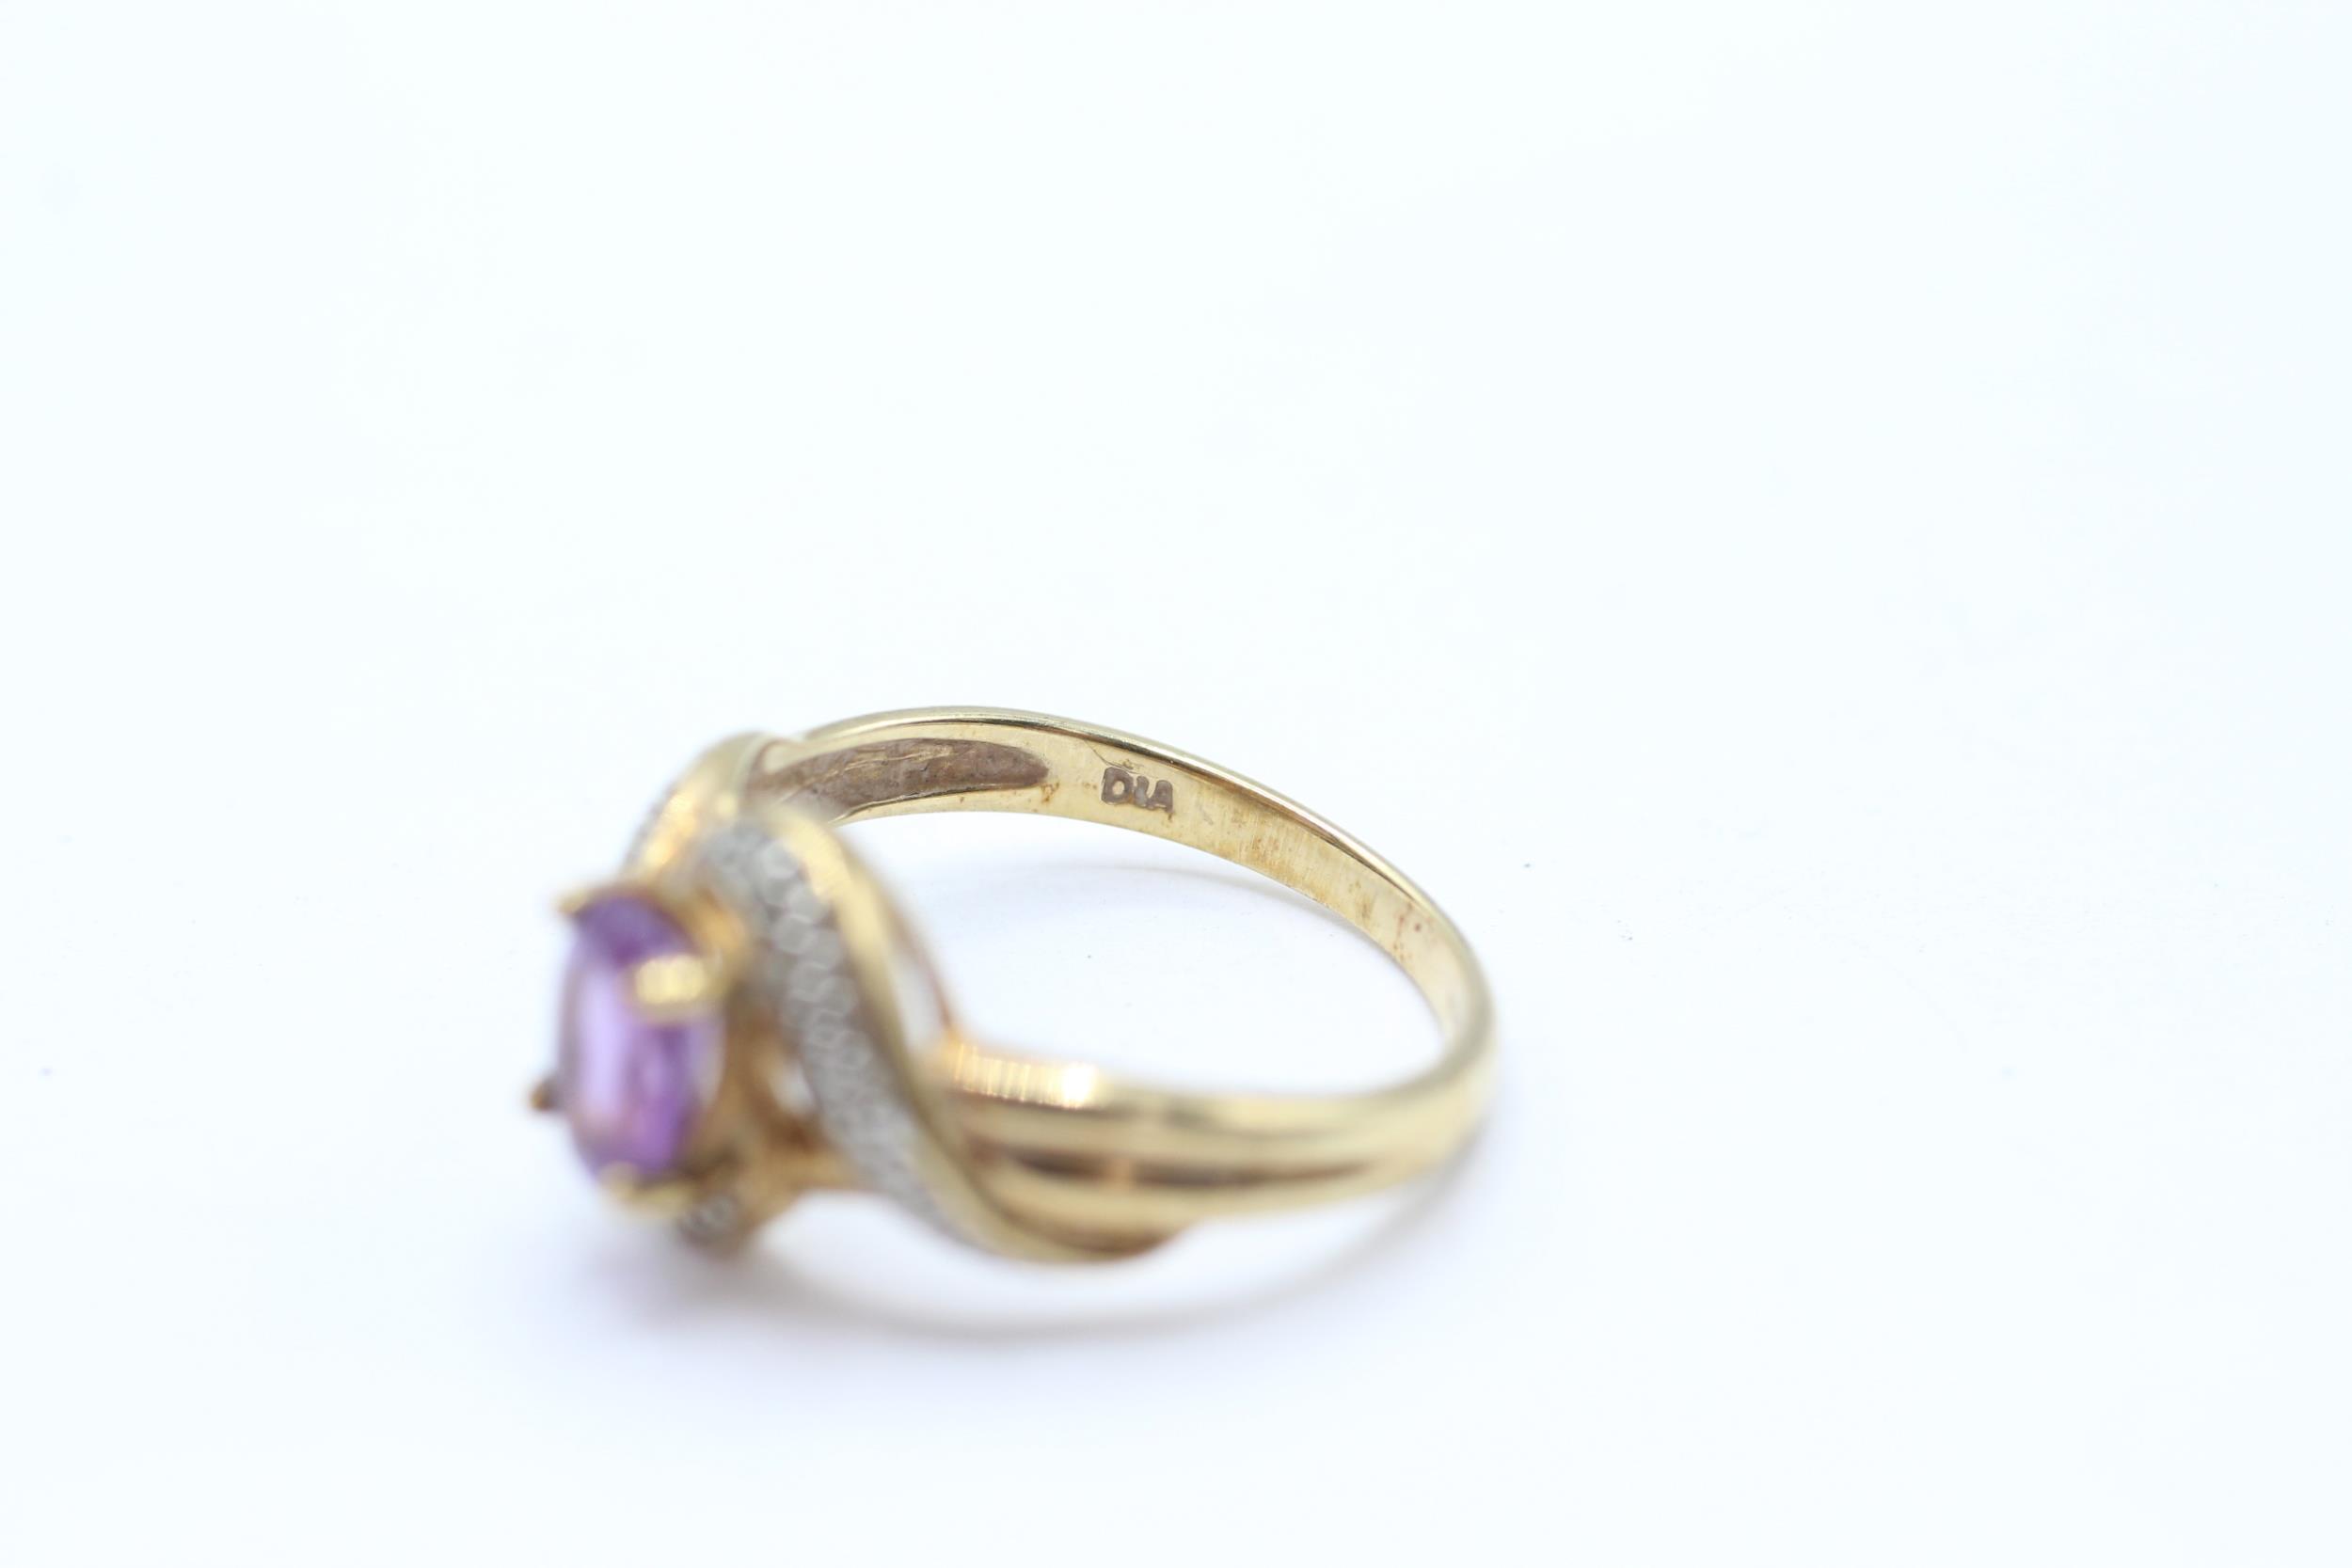 9ct gold amethyst single stone twist ring with diamond accent Size M 2.3 g - Image 4 of 4